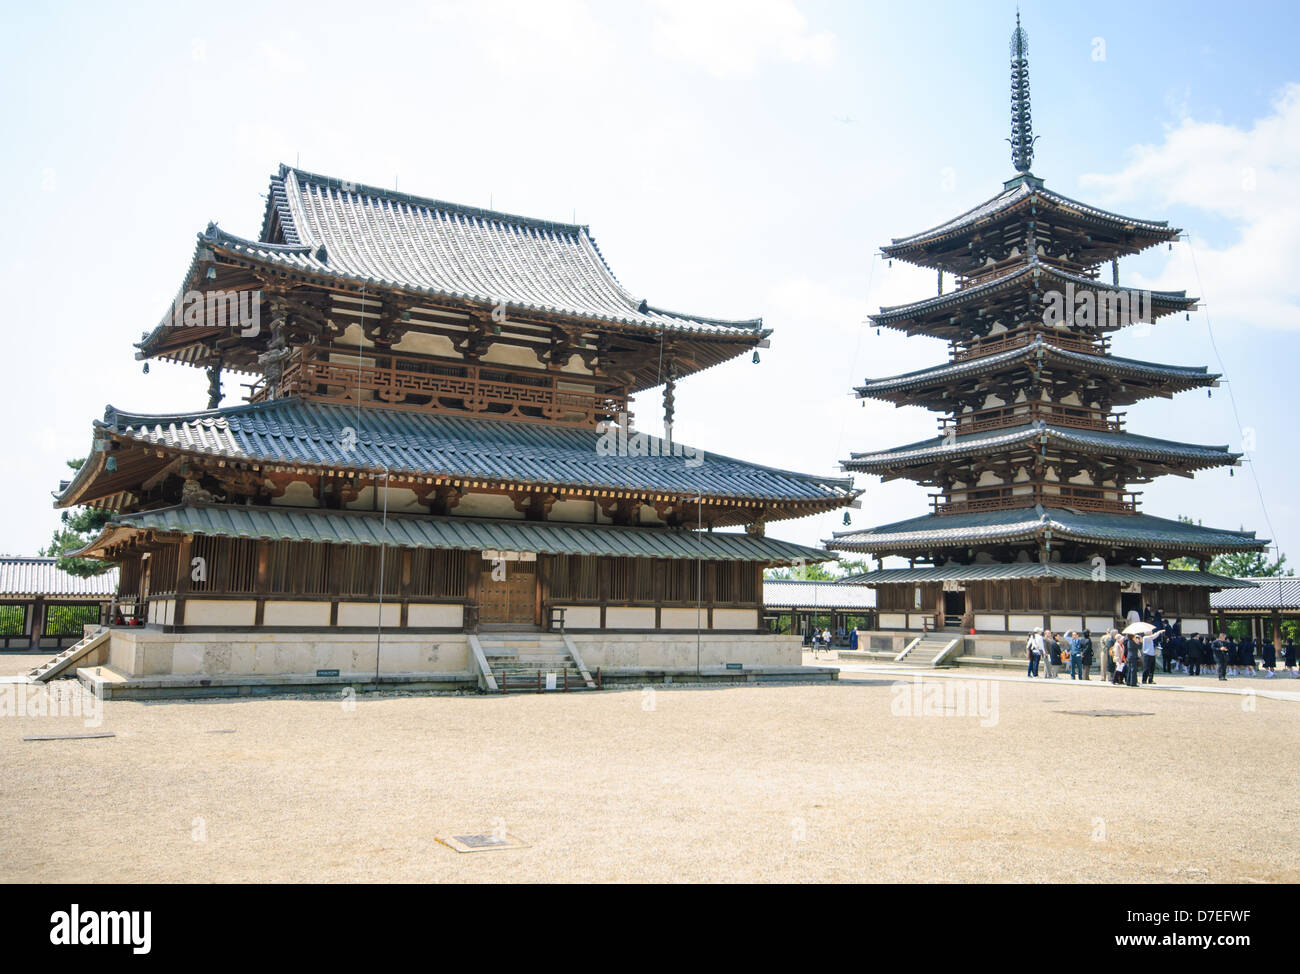 Horyu-ji Temple, near Nara, Japan. These two buildings are said to be two of the oldest wooden buildings in the world. Stock Photo